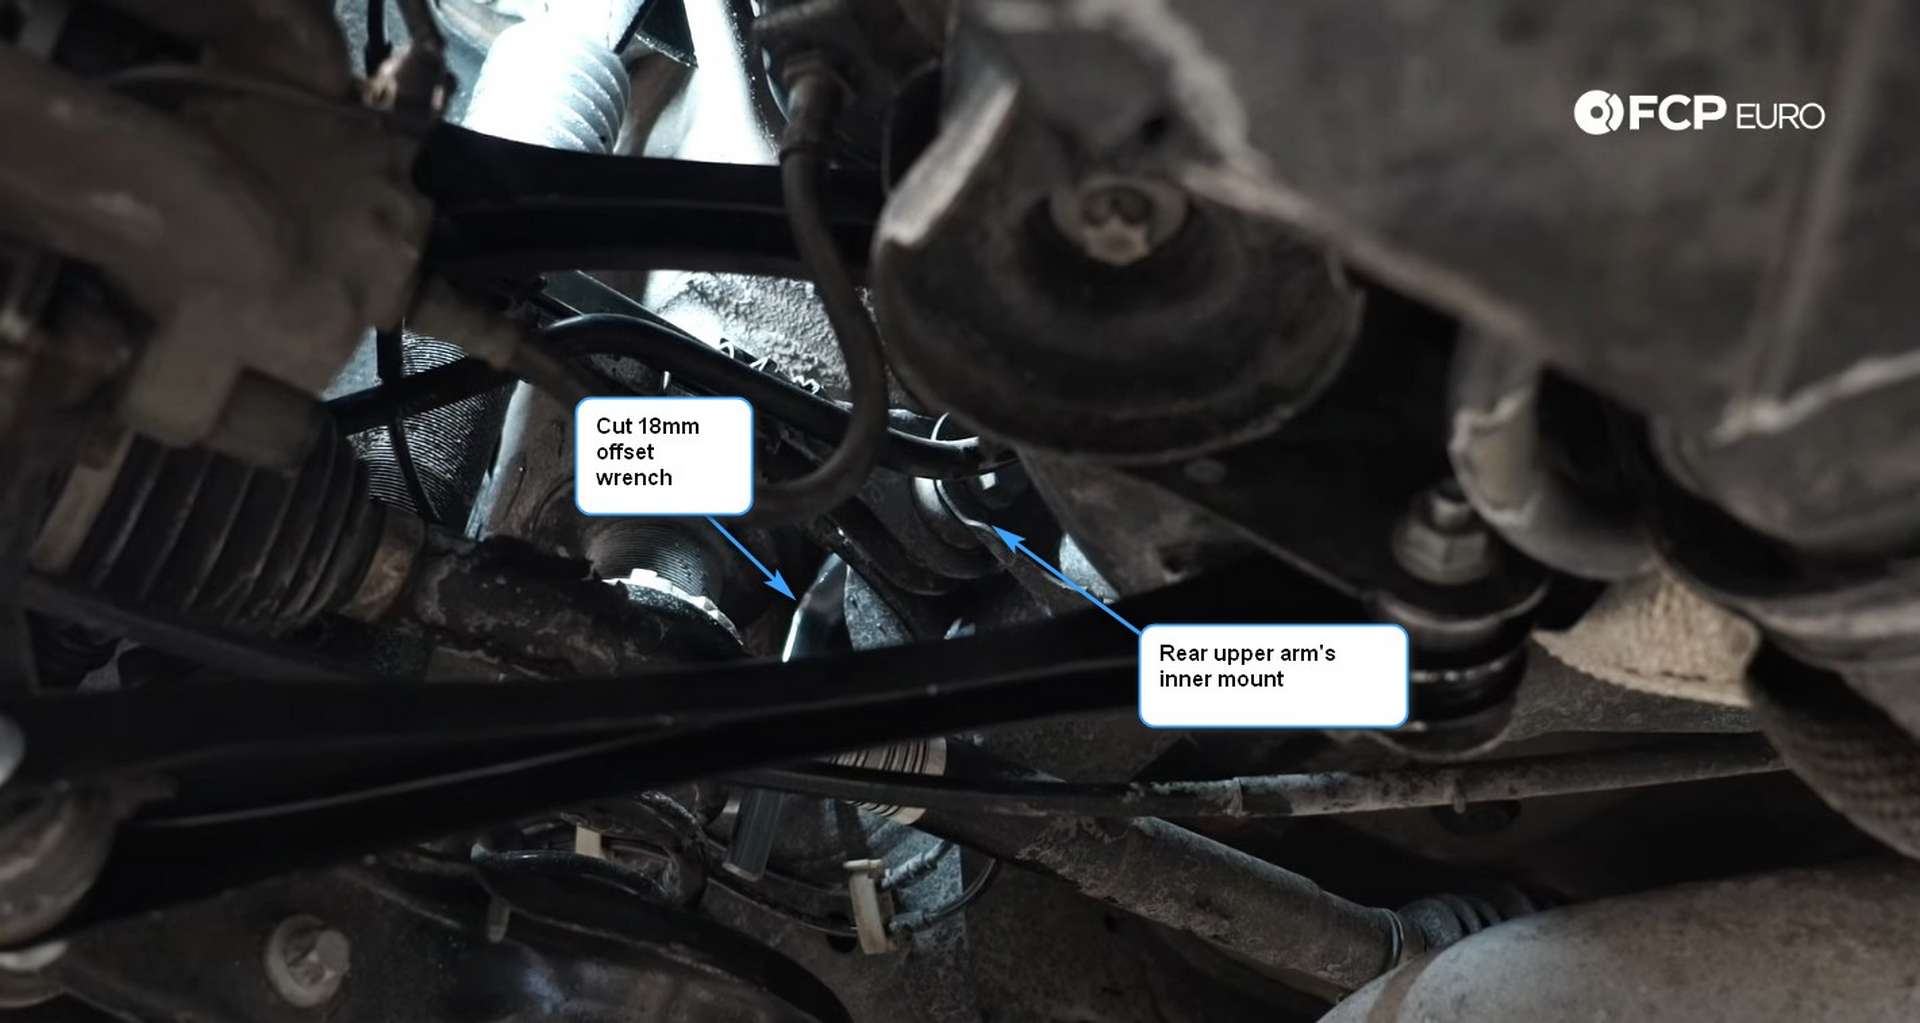 DIY BMW F30 Rear Control Arm Replacement rear upper arm's inner mount with the cut wrench